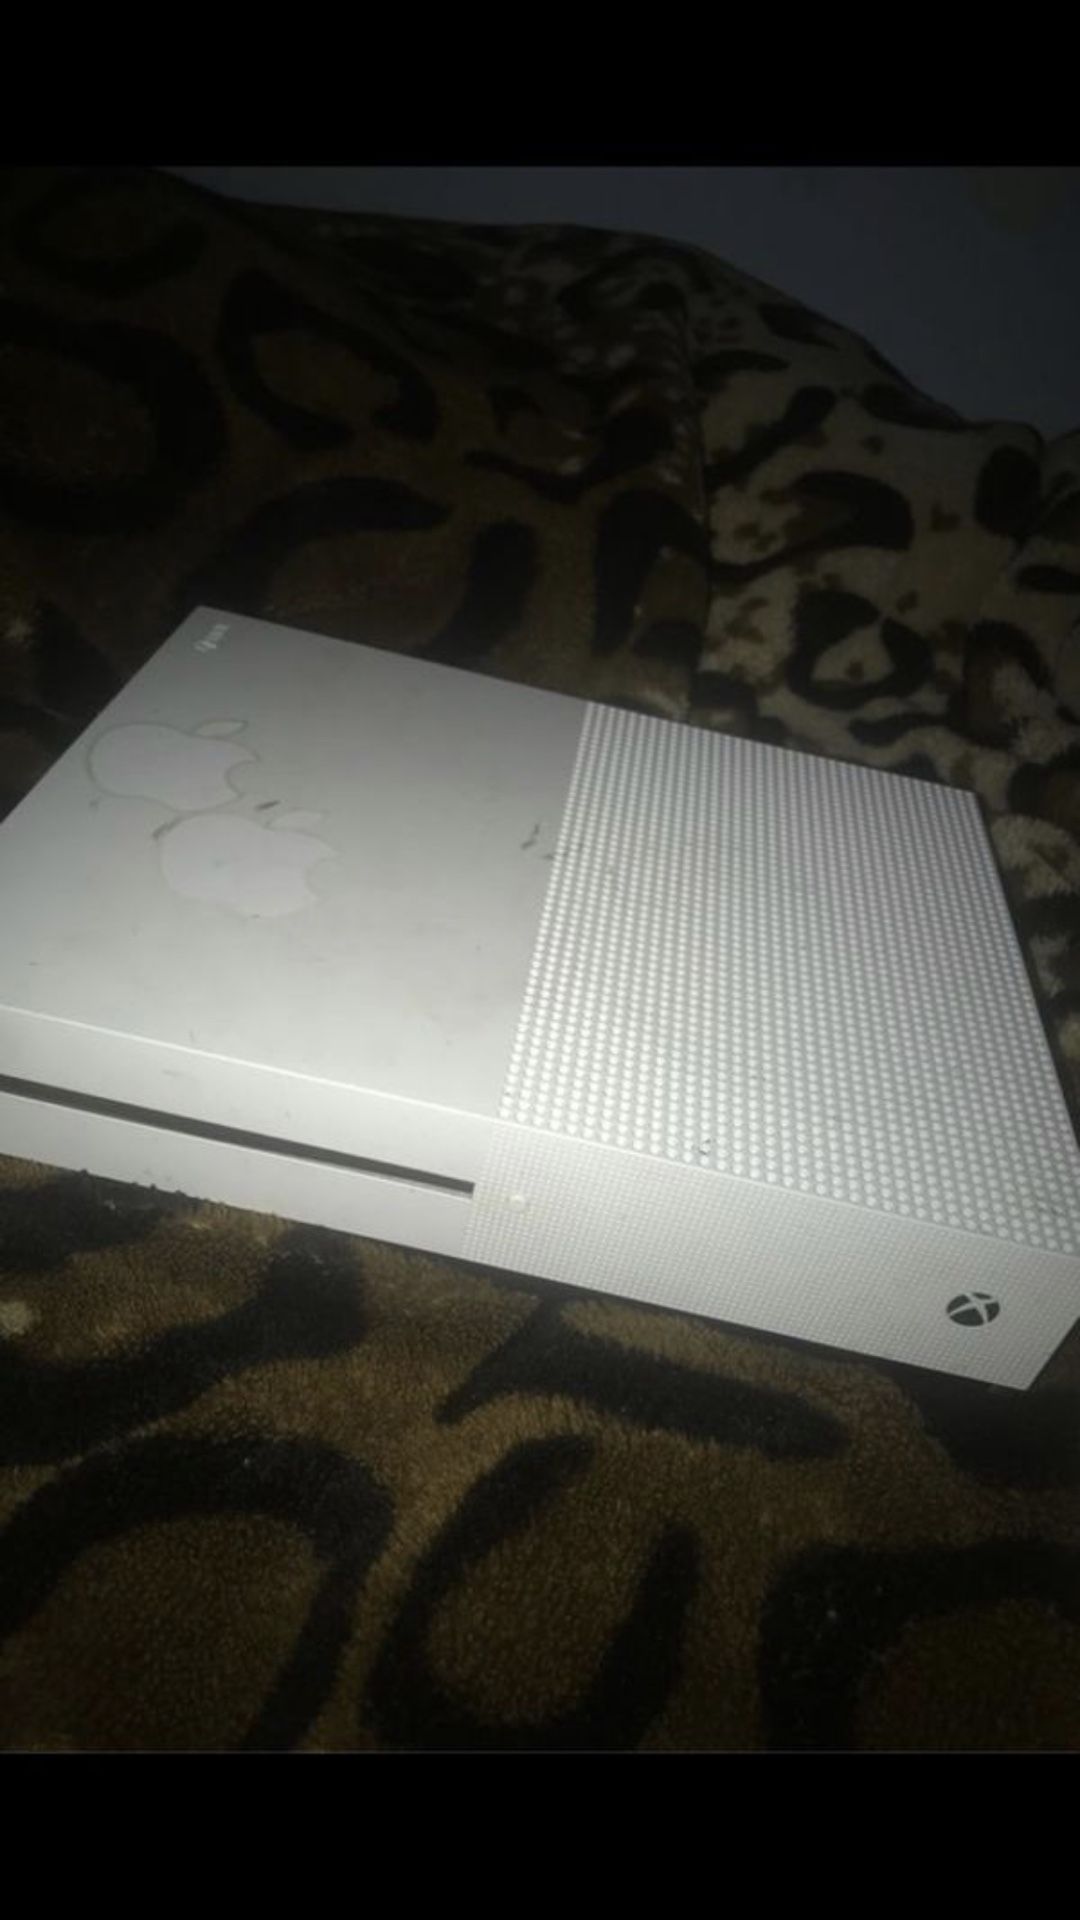 Xbox One S 500gb with controller and wires NEED GONE ASAP